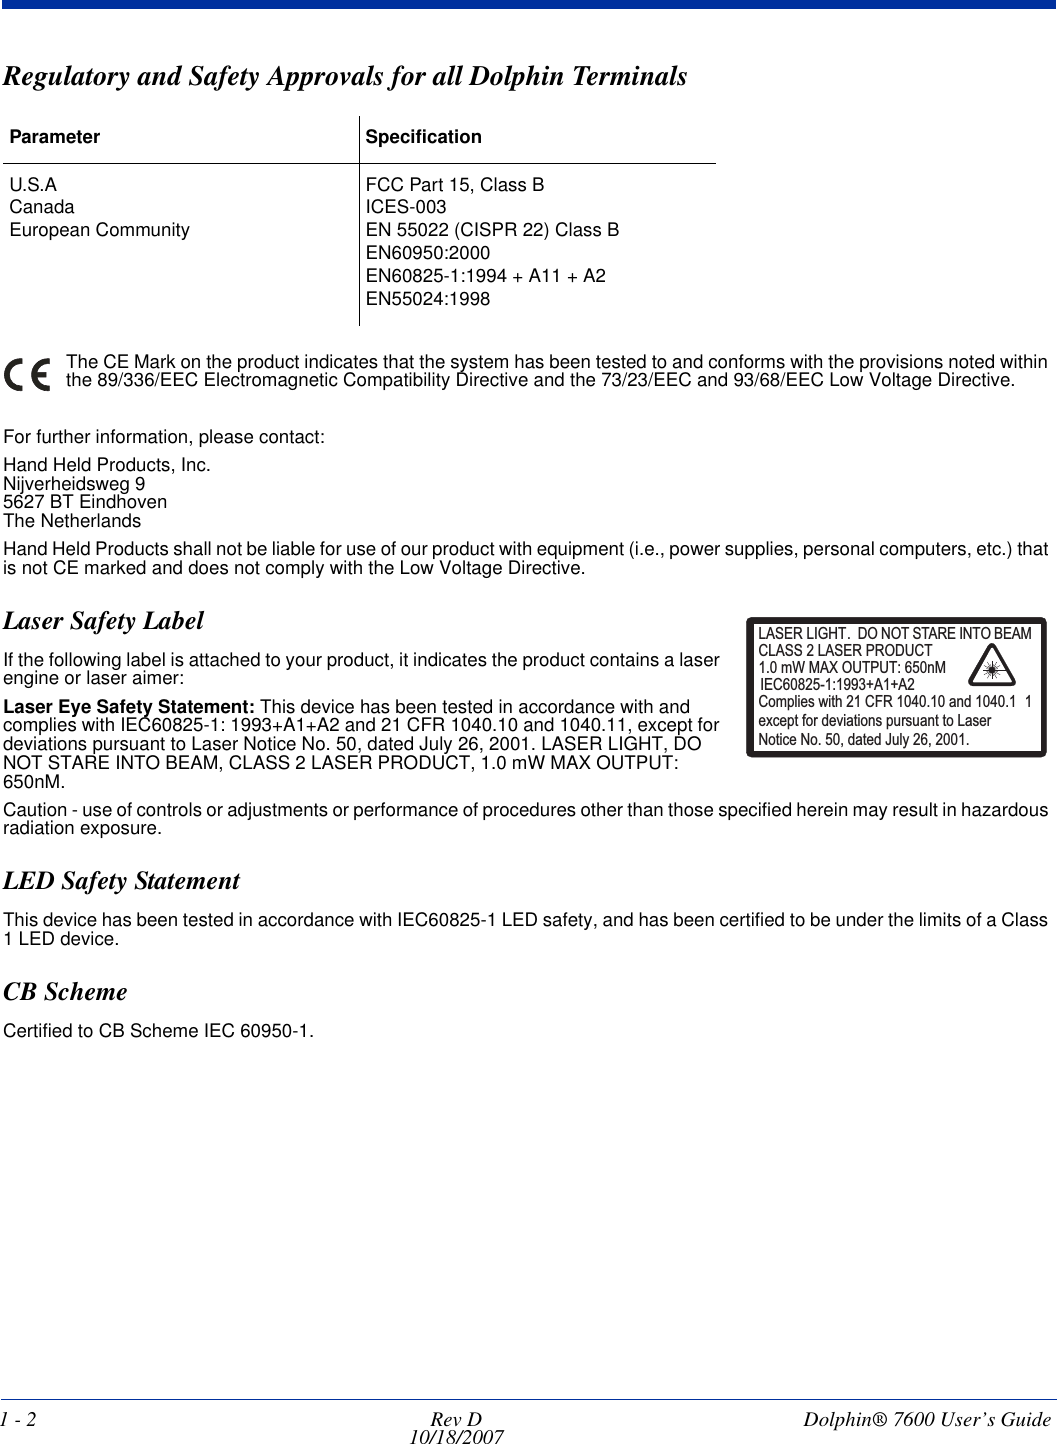 1 - 2 Rev D10/18/2007  Dolphin® 7600 User’s GuideRegulatory and Safety Approvals for all Dolphin Terminals The CE Mark on the product indicates that the system has been tested to and conforms with the provisions noted within the 89/336/EEC Electromagnetic Compatibility Directive and the 73/23/EEC and 93/68/EEC Low Voltage Directive.For further information, please contact:Hand Held Products, Inc.Nijverheidsweg 95627 BT EindhovenThe NetherlandsHand Held Products shall not be liable for use of our product with equipment (i.e., power supplies, personal computers, etc.) that is not CE marked and does not comply with the Low Voltage Directive.Laser Safety LabelIf the following label is attached to your product, it indicates the product contains a laser engine or laser aimer: Laser Eye Safety Statement: This device has been tested in accordance with and complies with IEC60825-1: 1993+A1+A2 and 21 CFR 1040.10 and 1040.11, except for deviations pursuant to Laser Notice No. 50, dated July 26, 2001. LASER LIGHT, DO NOT STARE INTO BEAM, CLASS 2 LASER PRODUCT, 1.0 mW MAX OUTPUT: 650nM. Caution - use of controls or adjustments or performance of procedures other than those specified herein may result in hazardous radiation exposure.LED Safety StatementThis device has been tested in accordance with IEC60825-1 LED safety, and has been certified to be under the limits of a Class 1 LED device.CB SchemeCertified to CB Scheme IEC 60950-1.Parameter SpecificationU.S.ACanadaEuropean CommunityFCC Part 15, Class BICES-003EN 55022 (CISPR 22) Class BEN60950:2000EN60825-1:1994 + A11 + A2EN55024:1998LASER LIGHT. DO NOT STARE INTO BEAM1.0 mW MAX OUTPUT: 650nMIEC60825-1:1993+A1+A2CLASS 2 LASER PRODUCTComplies with 21 CFR 1040.10 and 1040.1 1except for deviations pursuant to Laser Notice No. 50, dated July 26, 2001.